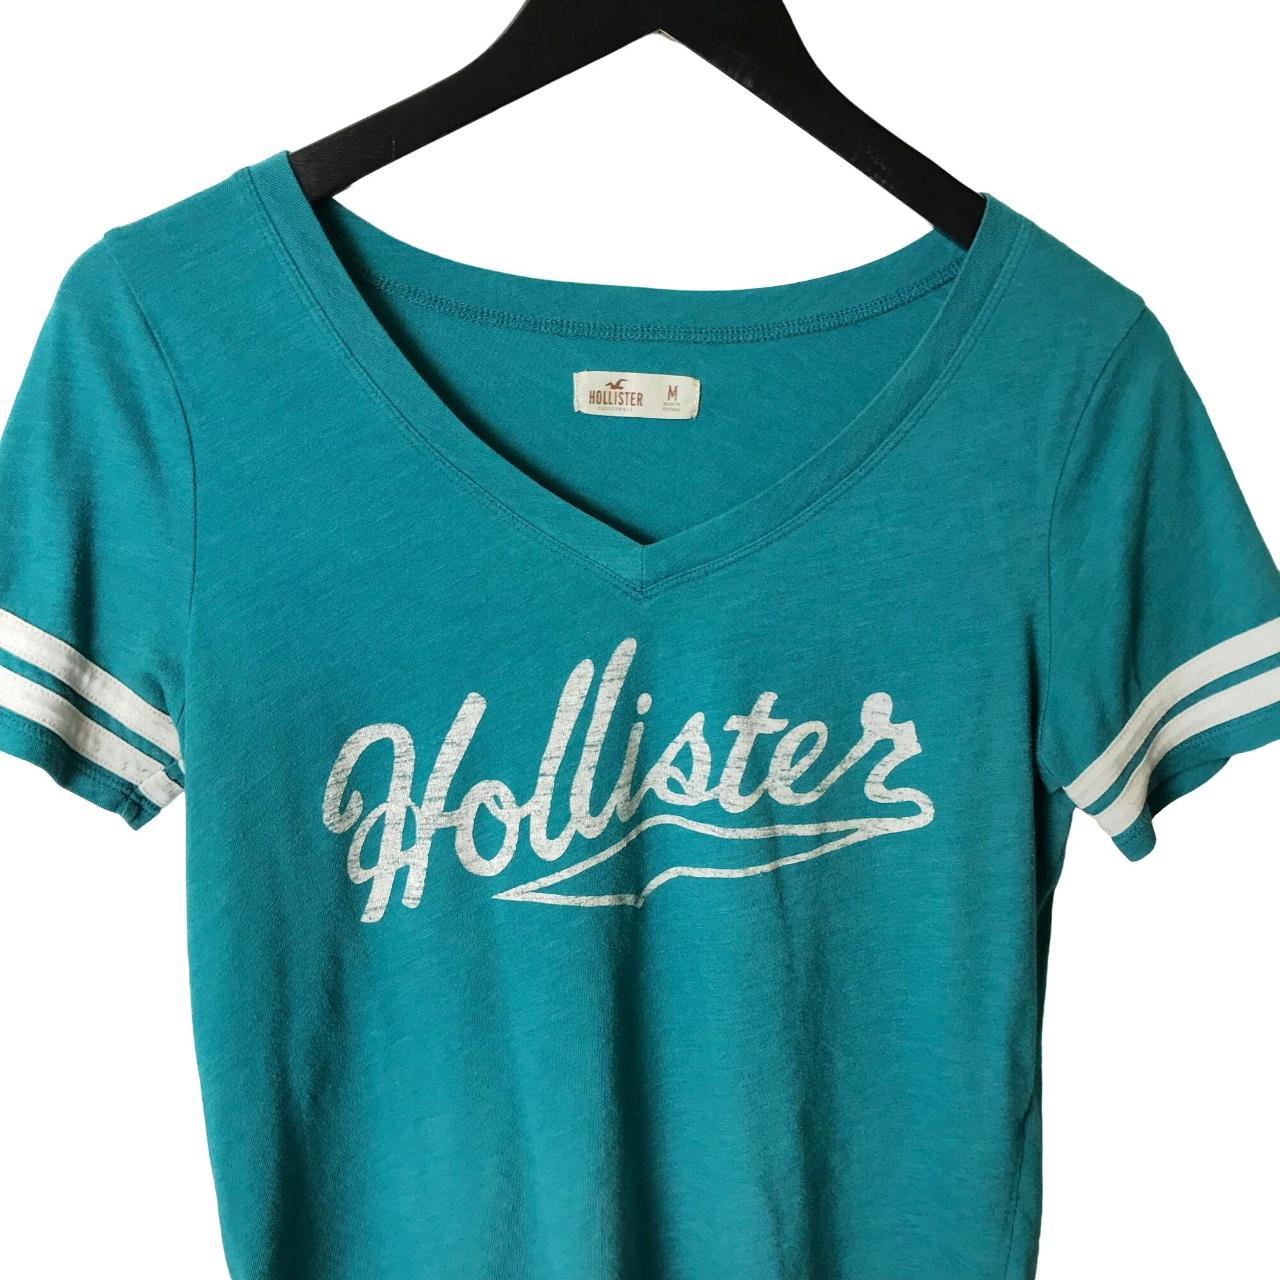 Hollister T Shirt Classic Trendy V-Neck Graphic Tee